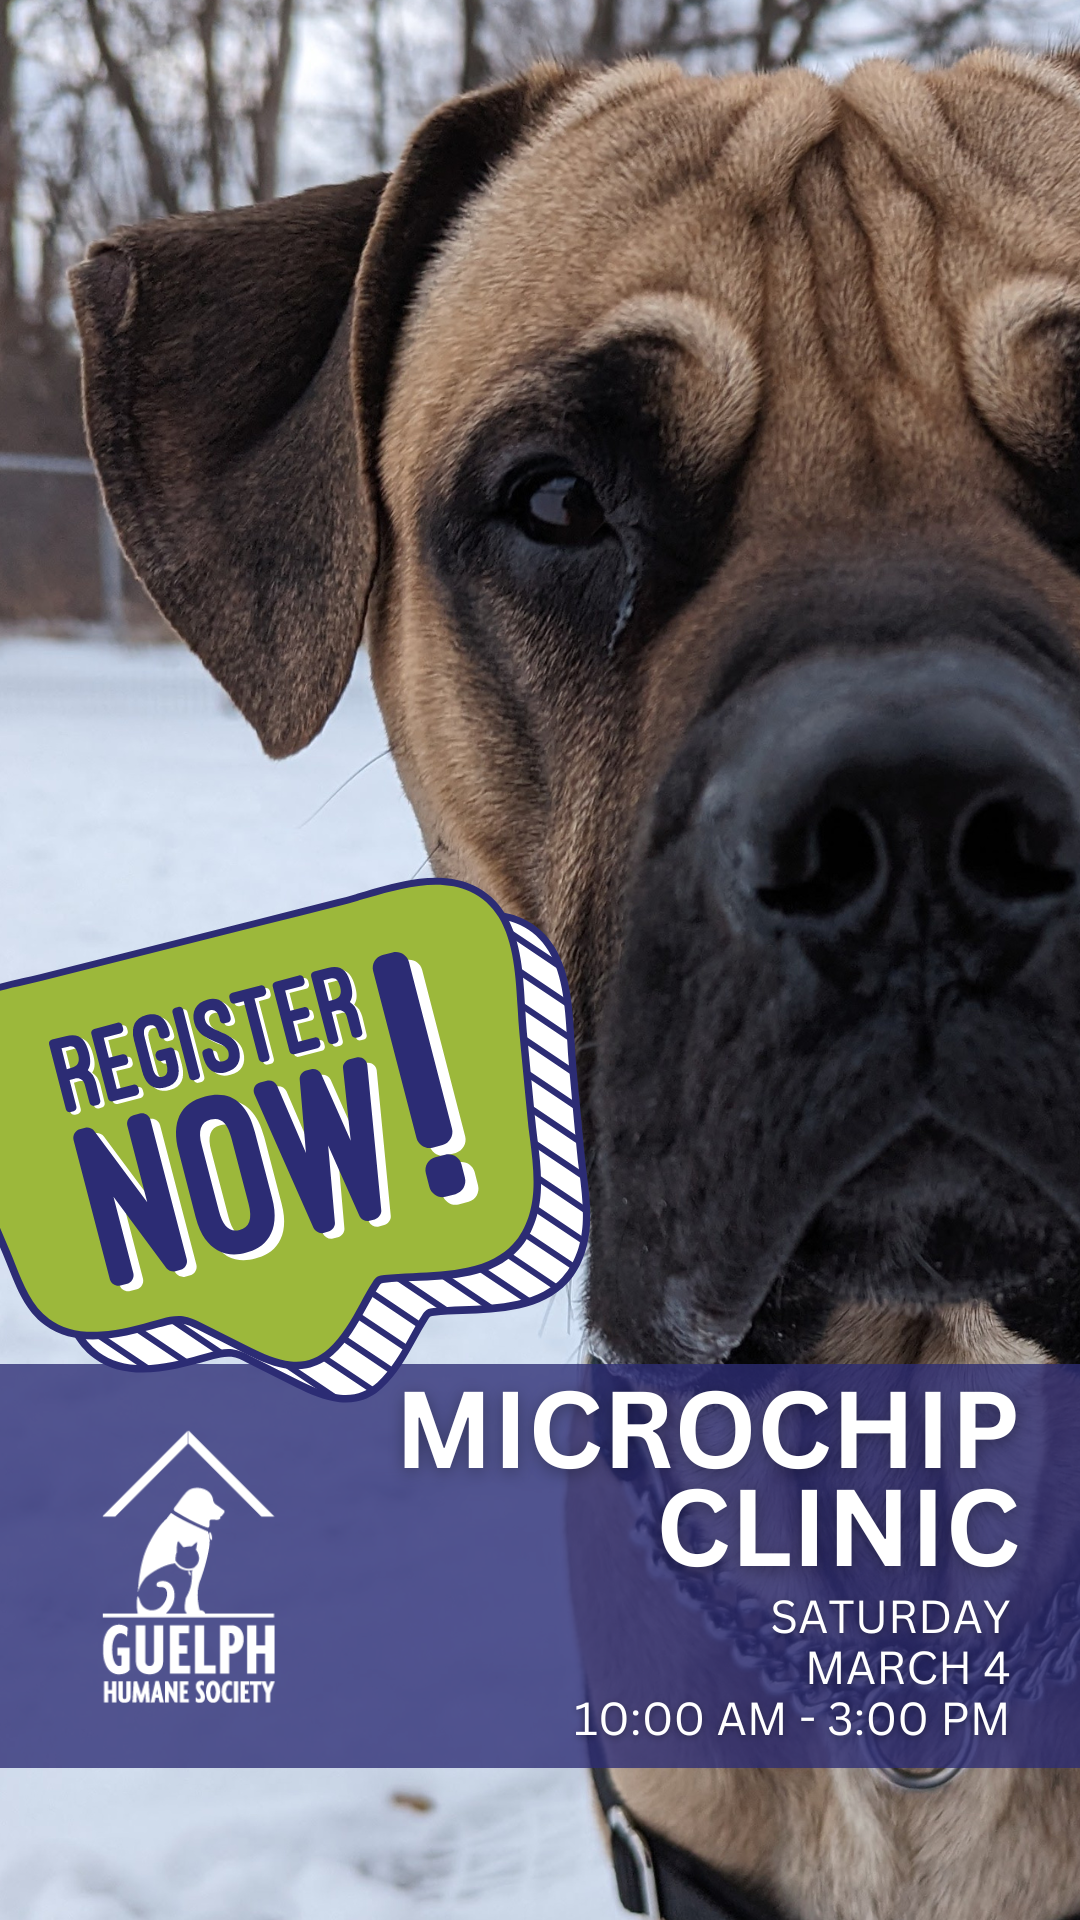 MICROCHIP CLINIC MARCH 4, REGISTER NOW